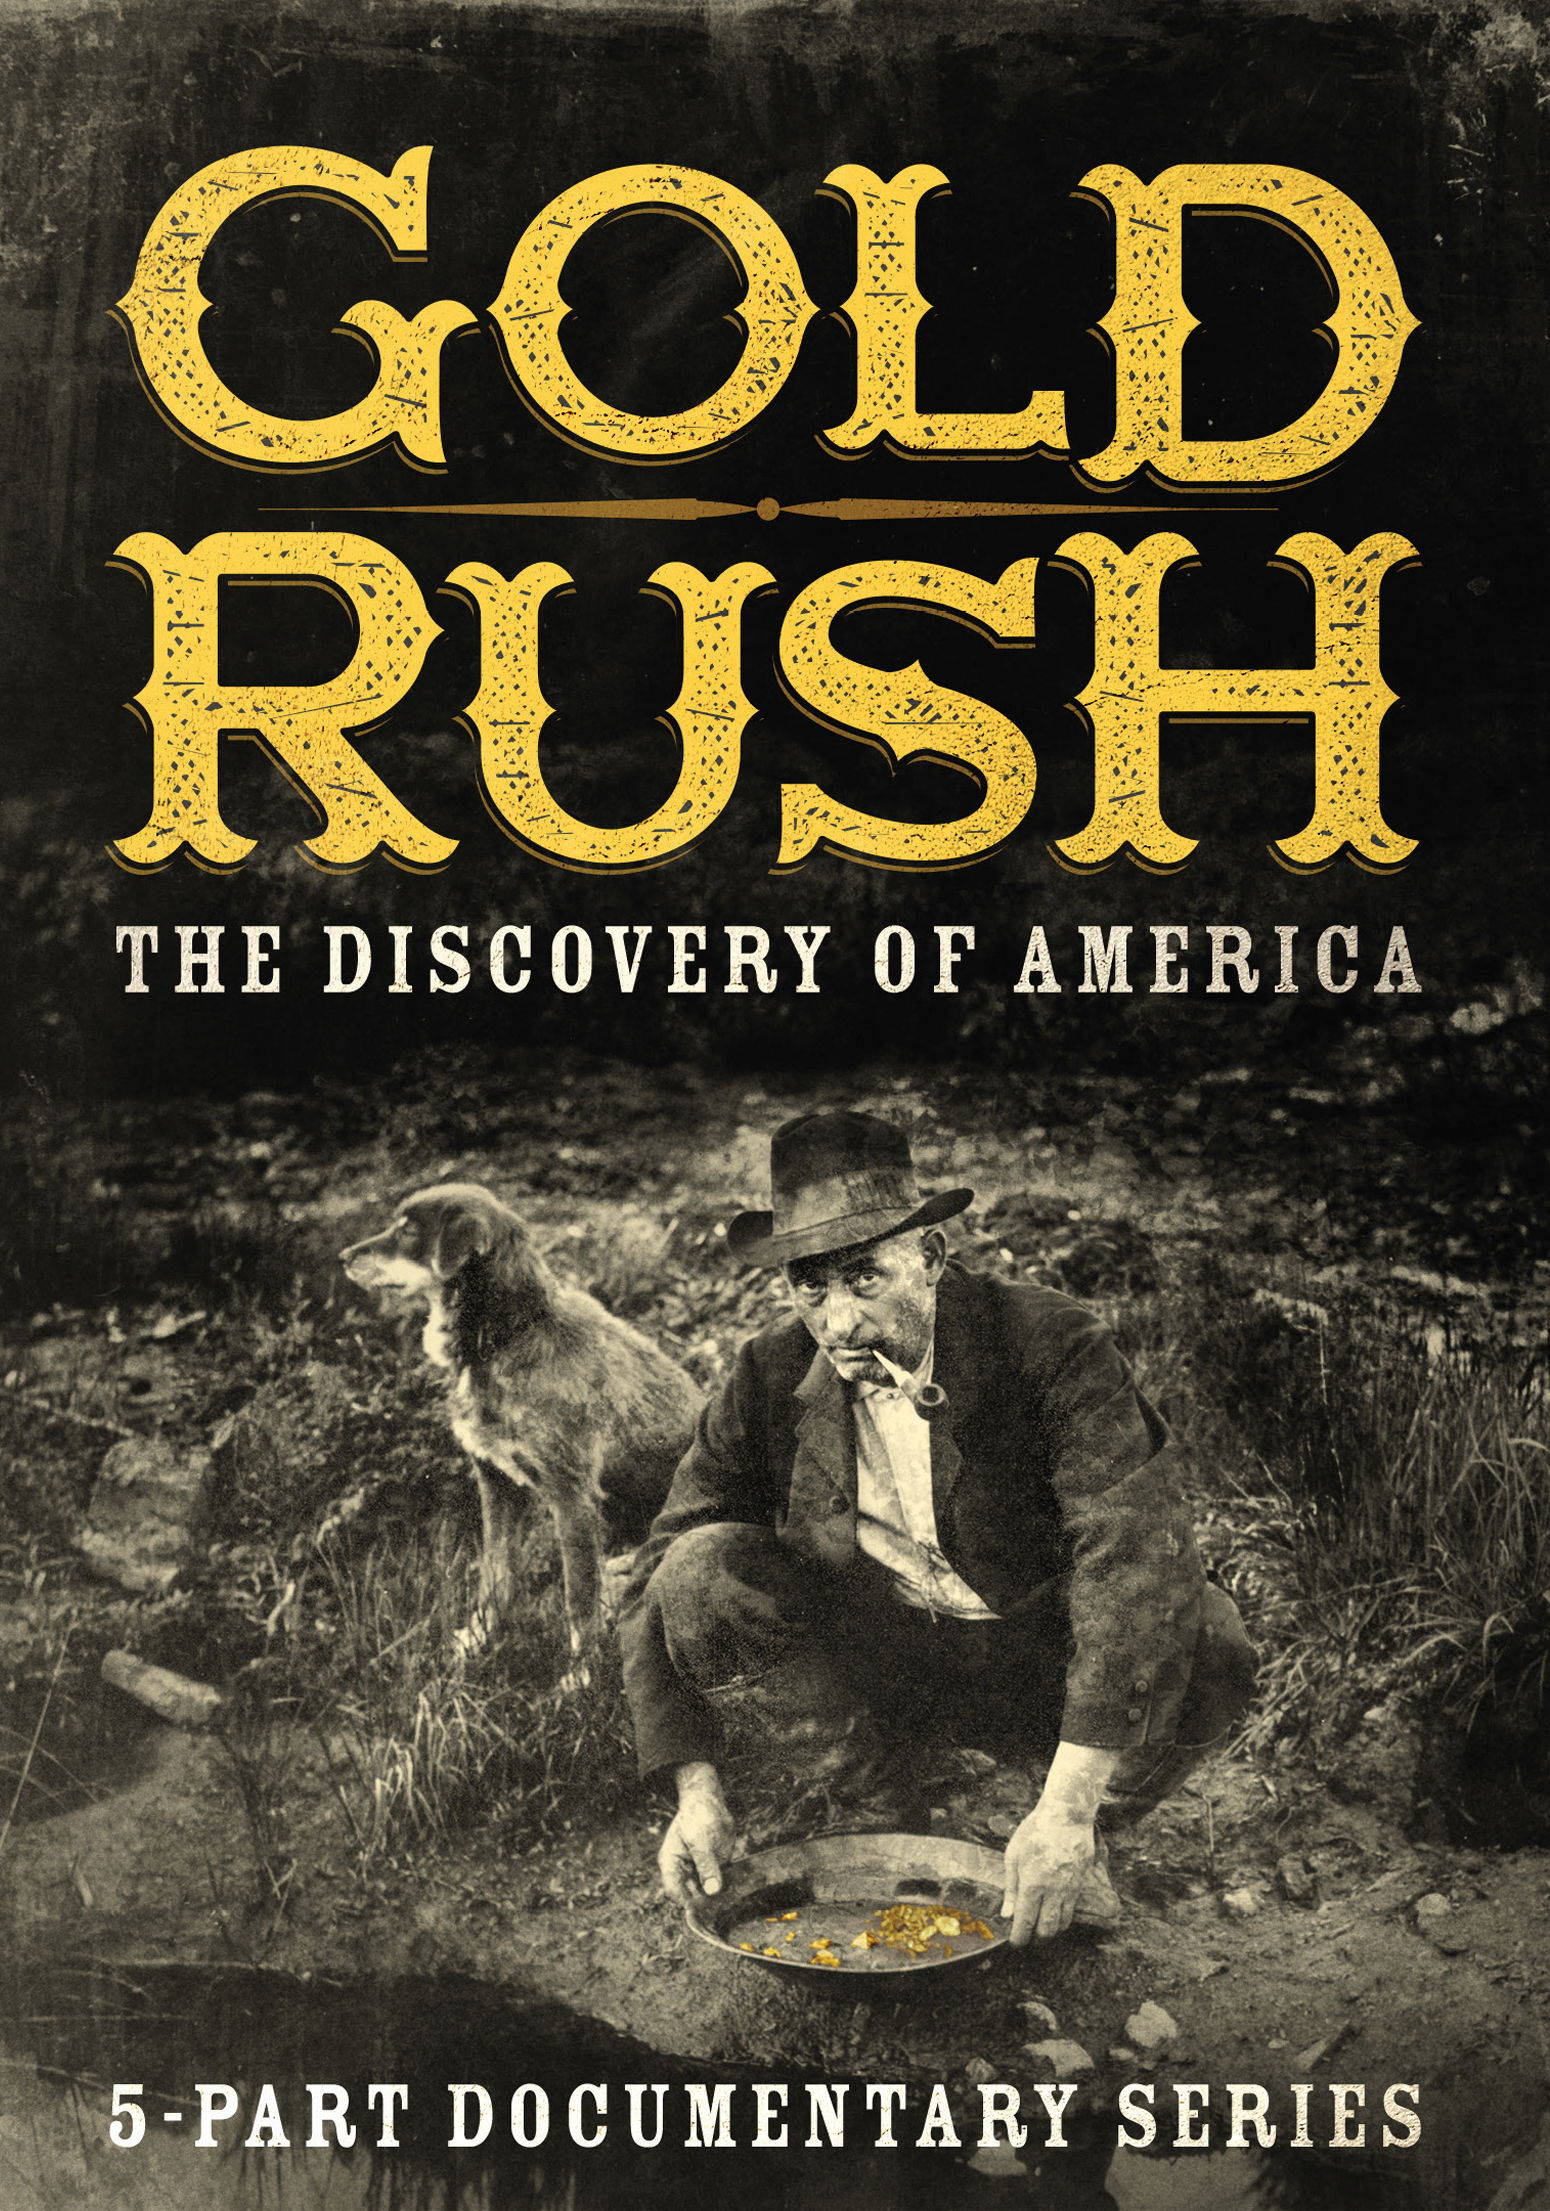 Discover gold. The Gold Rush. Золотая лихорадка по Дискавери. Rush Discovery. Gold Rush in America.